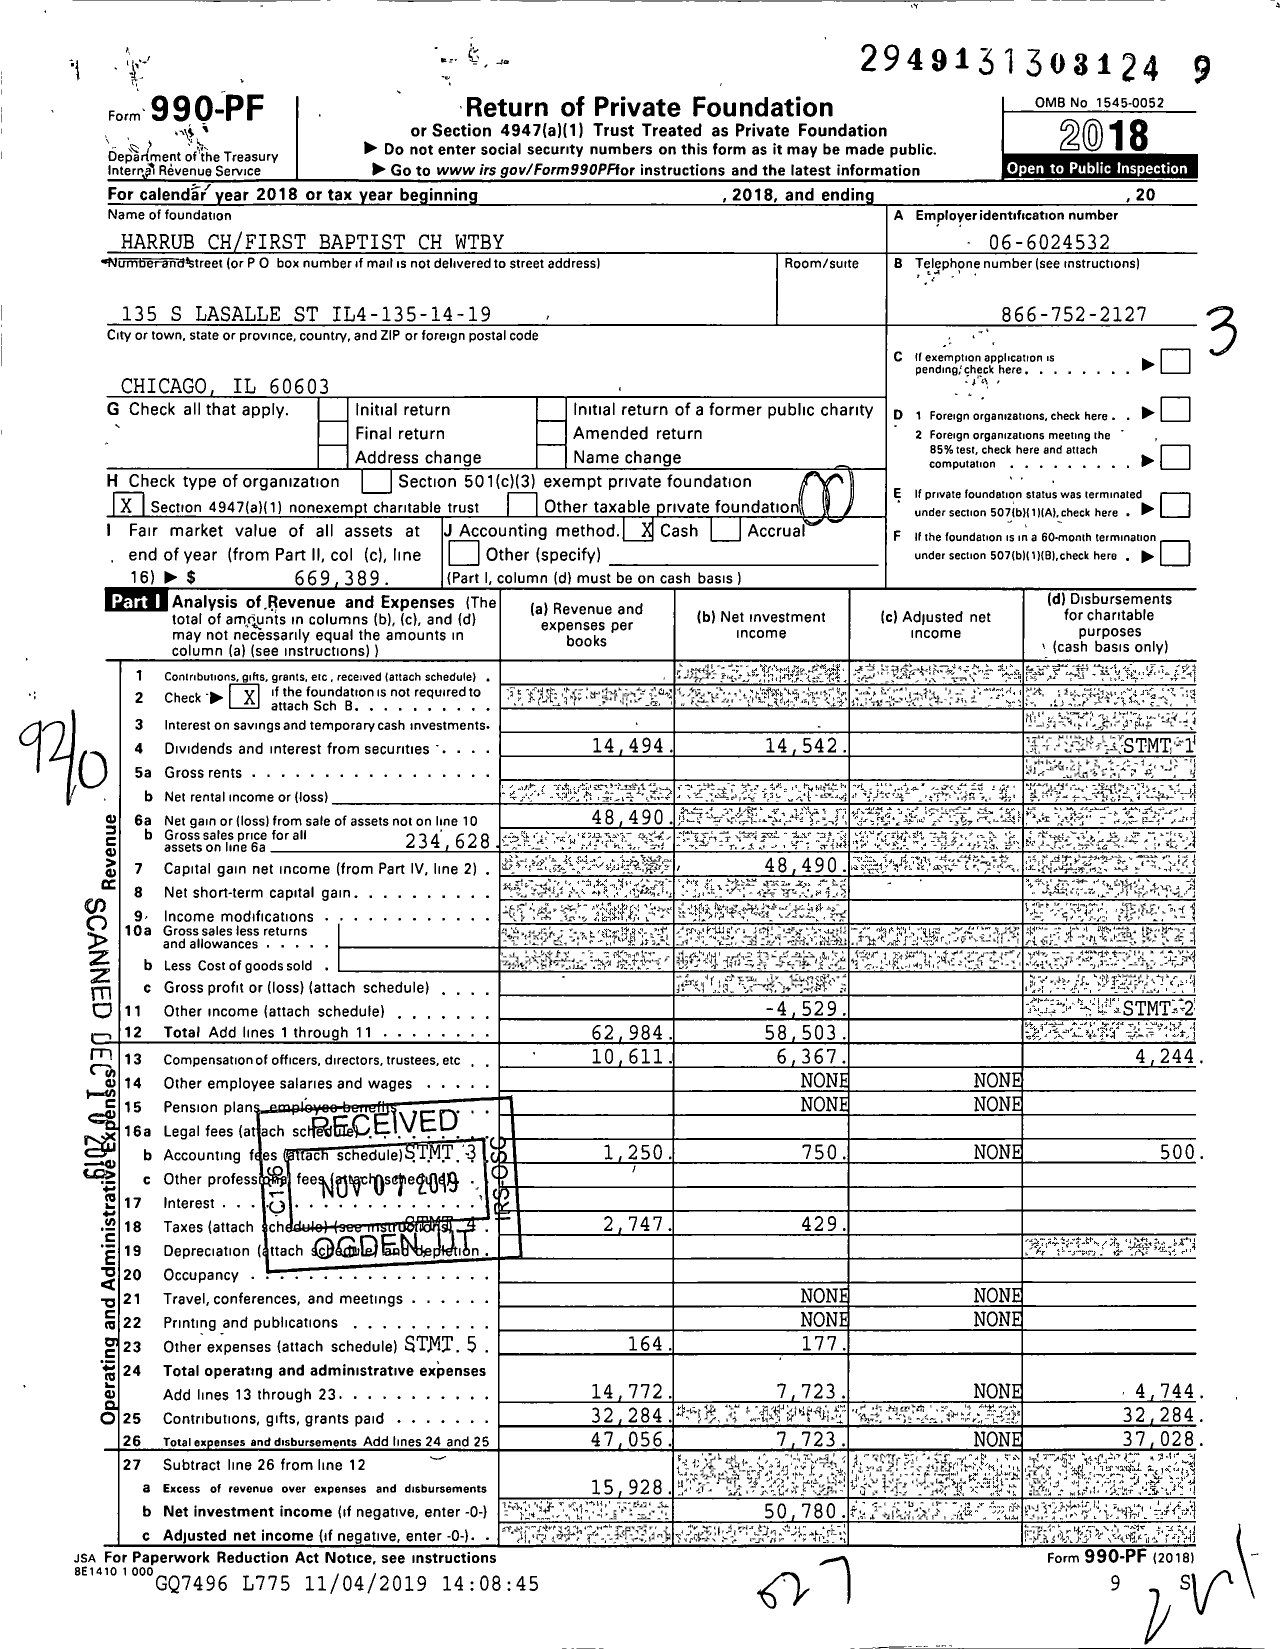 Image of first page of 2018 Form 990PF for Harrub Chfirst Baptist CH Wtby